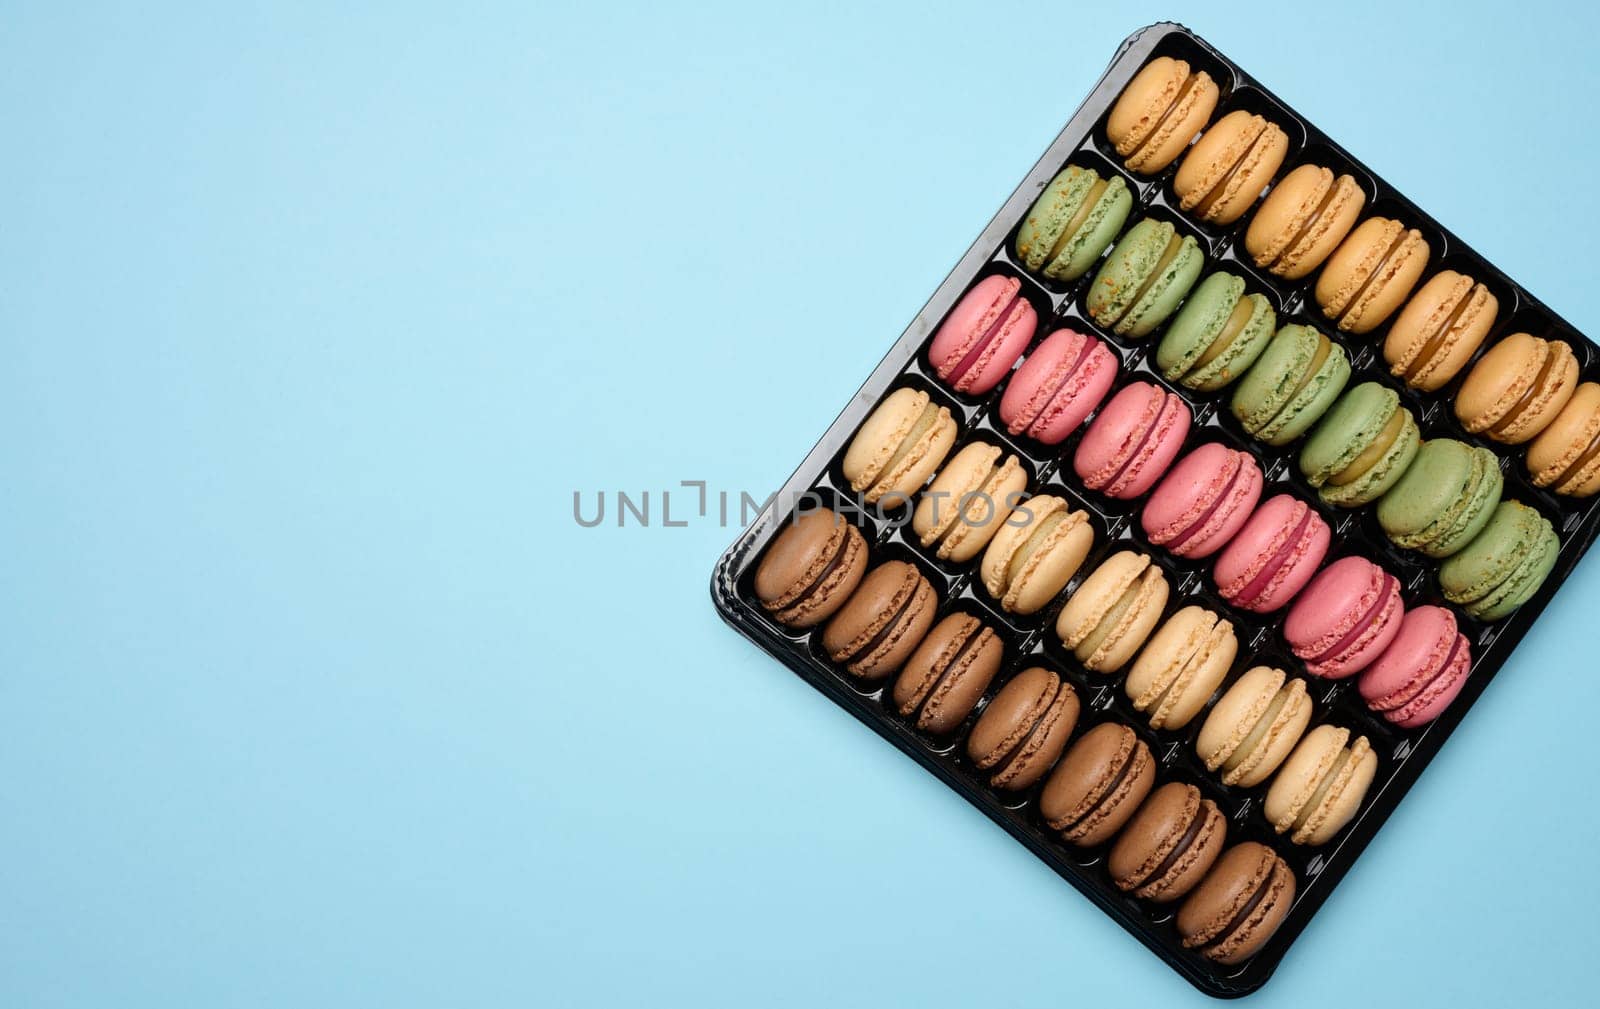 Multi-colored macarons on a blue background in a plastic box, top view by ndanko